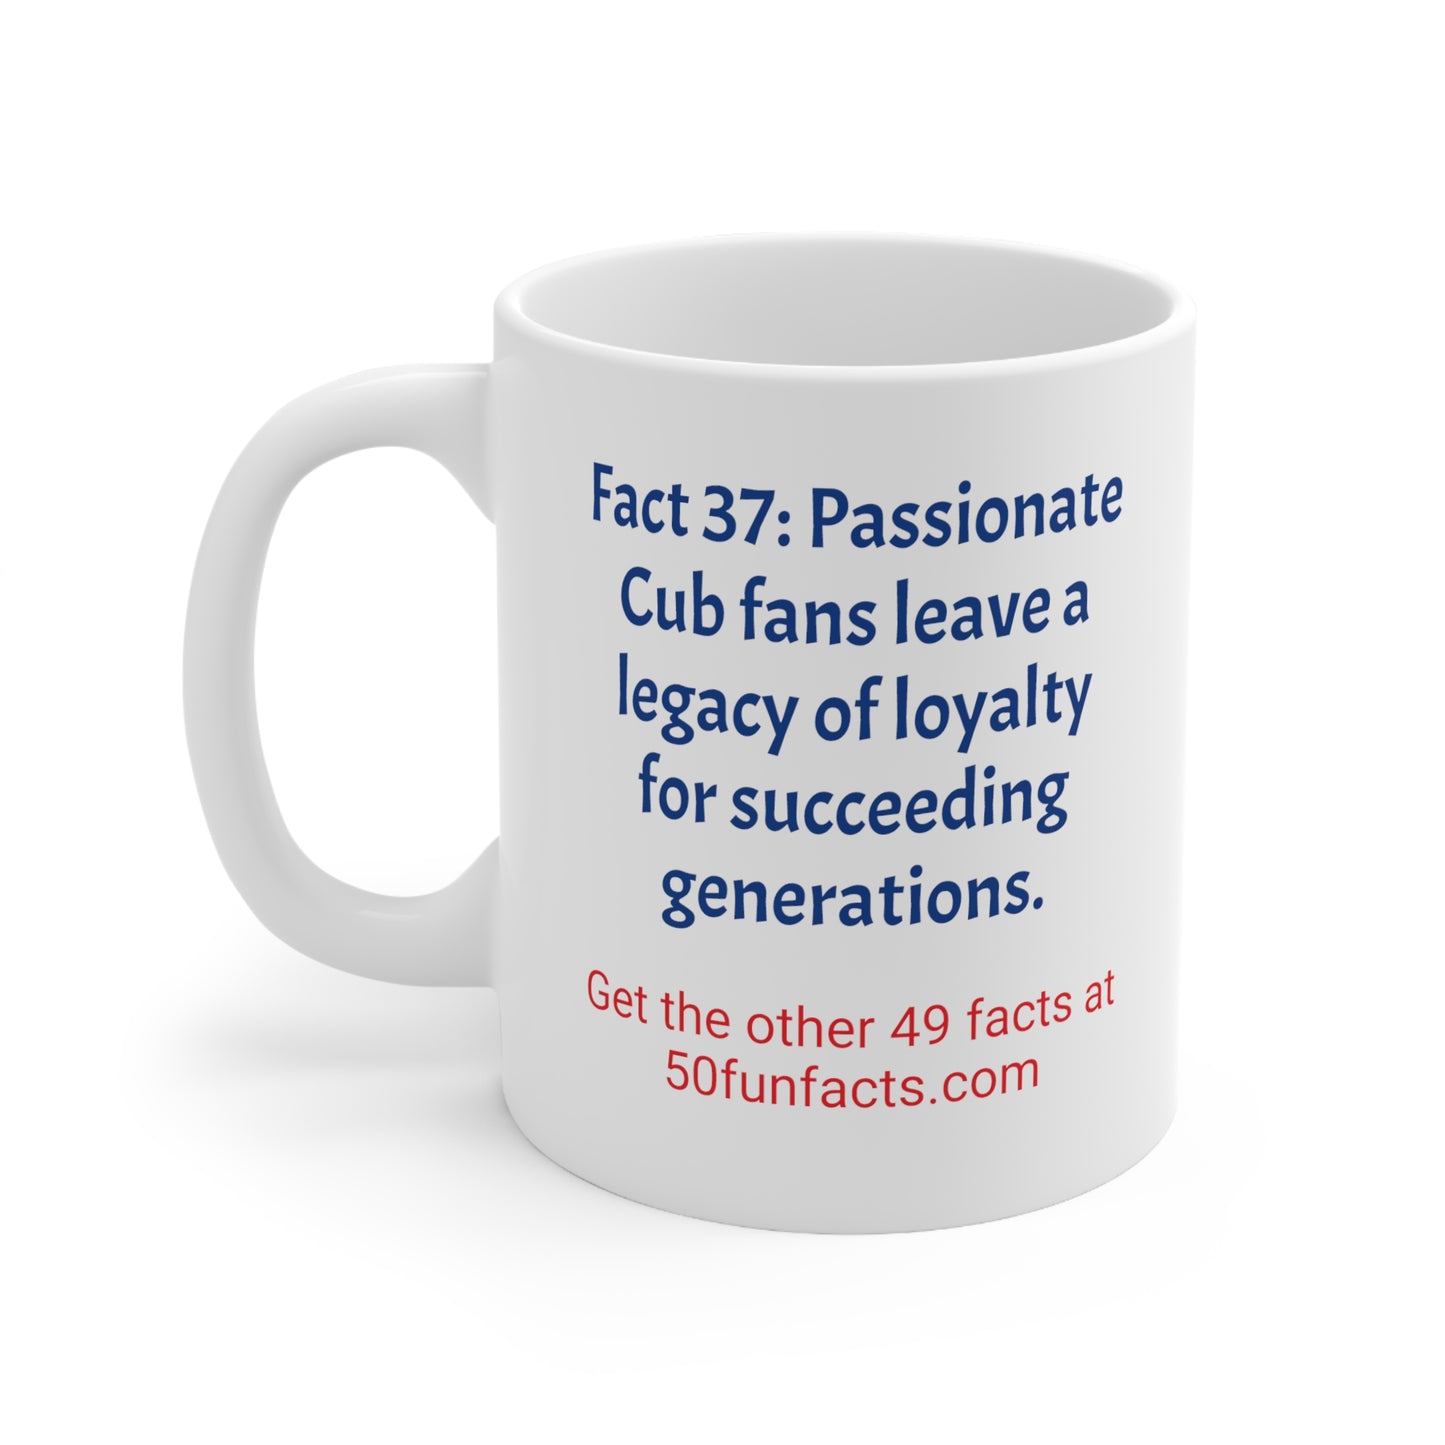 50 Fun Facts About the Chicago Cubs Mug